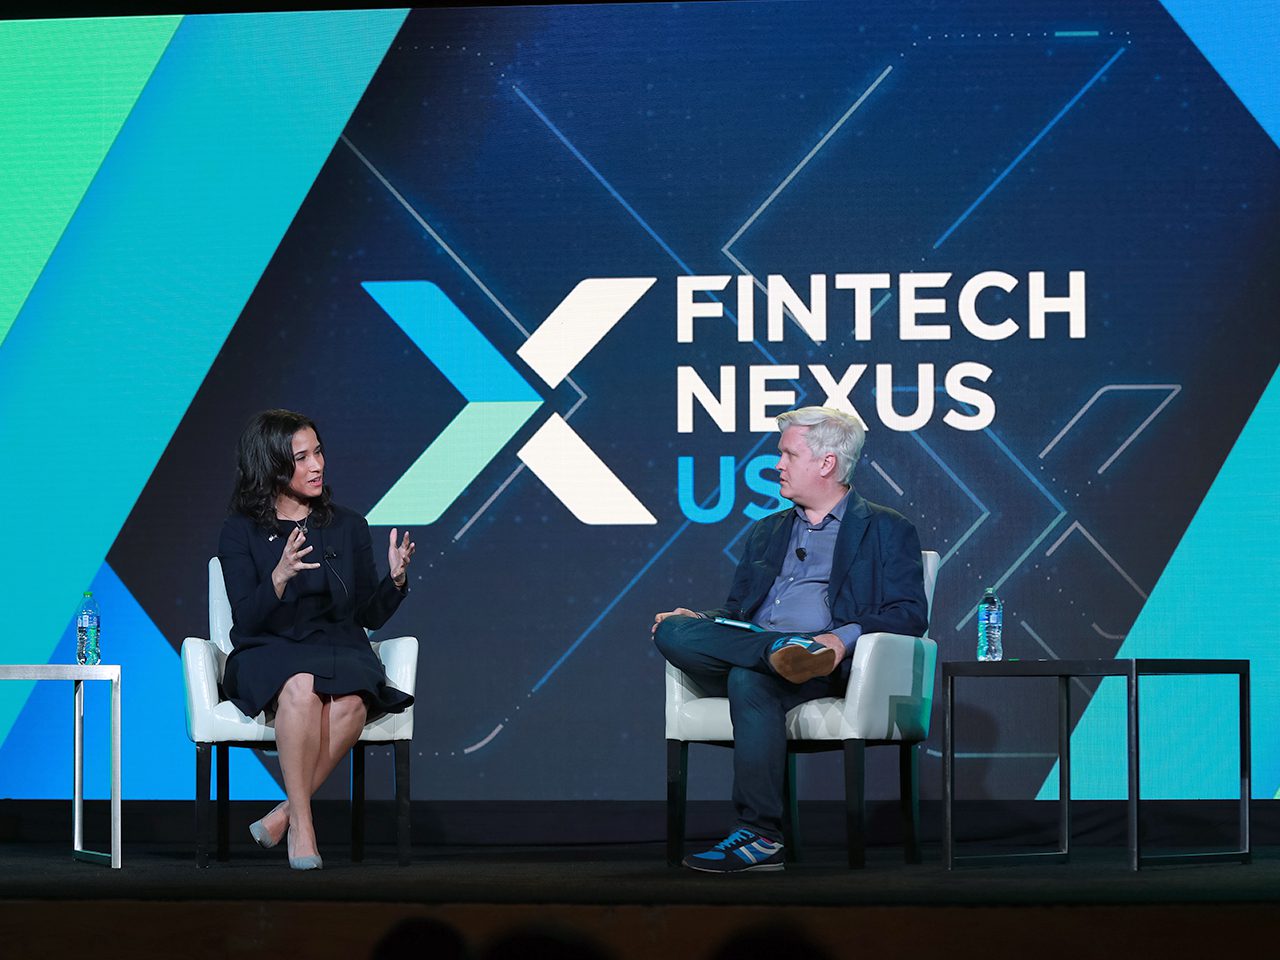 Superintendent of the Department of Financial Services (DFS), Adrienne Harris, spoke with Garry Reader, CEO of the American Fintech council, on how her department has taken a leading role in fostering innovation in the state of New York, at Fintech Nexus USA 2022 in New York.